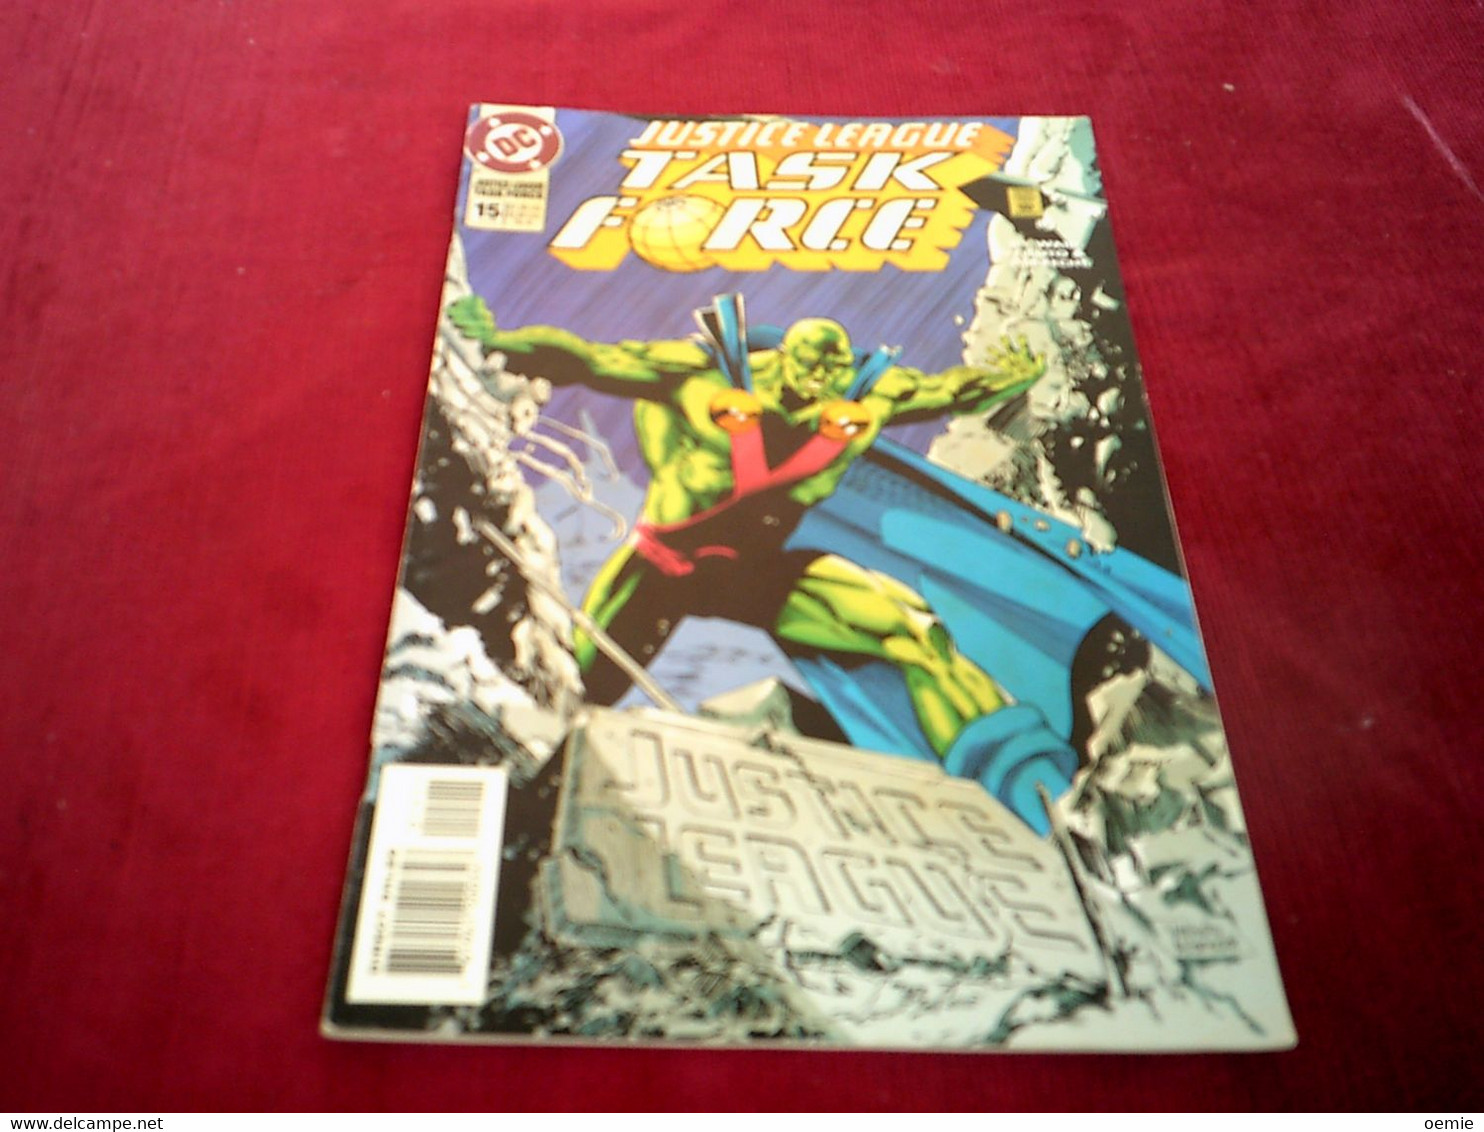 JUSTICE LEAGUE  TASK FORCE  N° 15 AUG 84 - DC